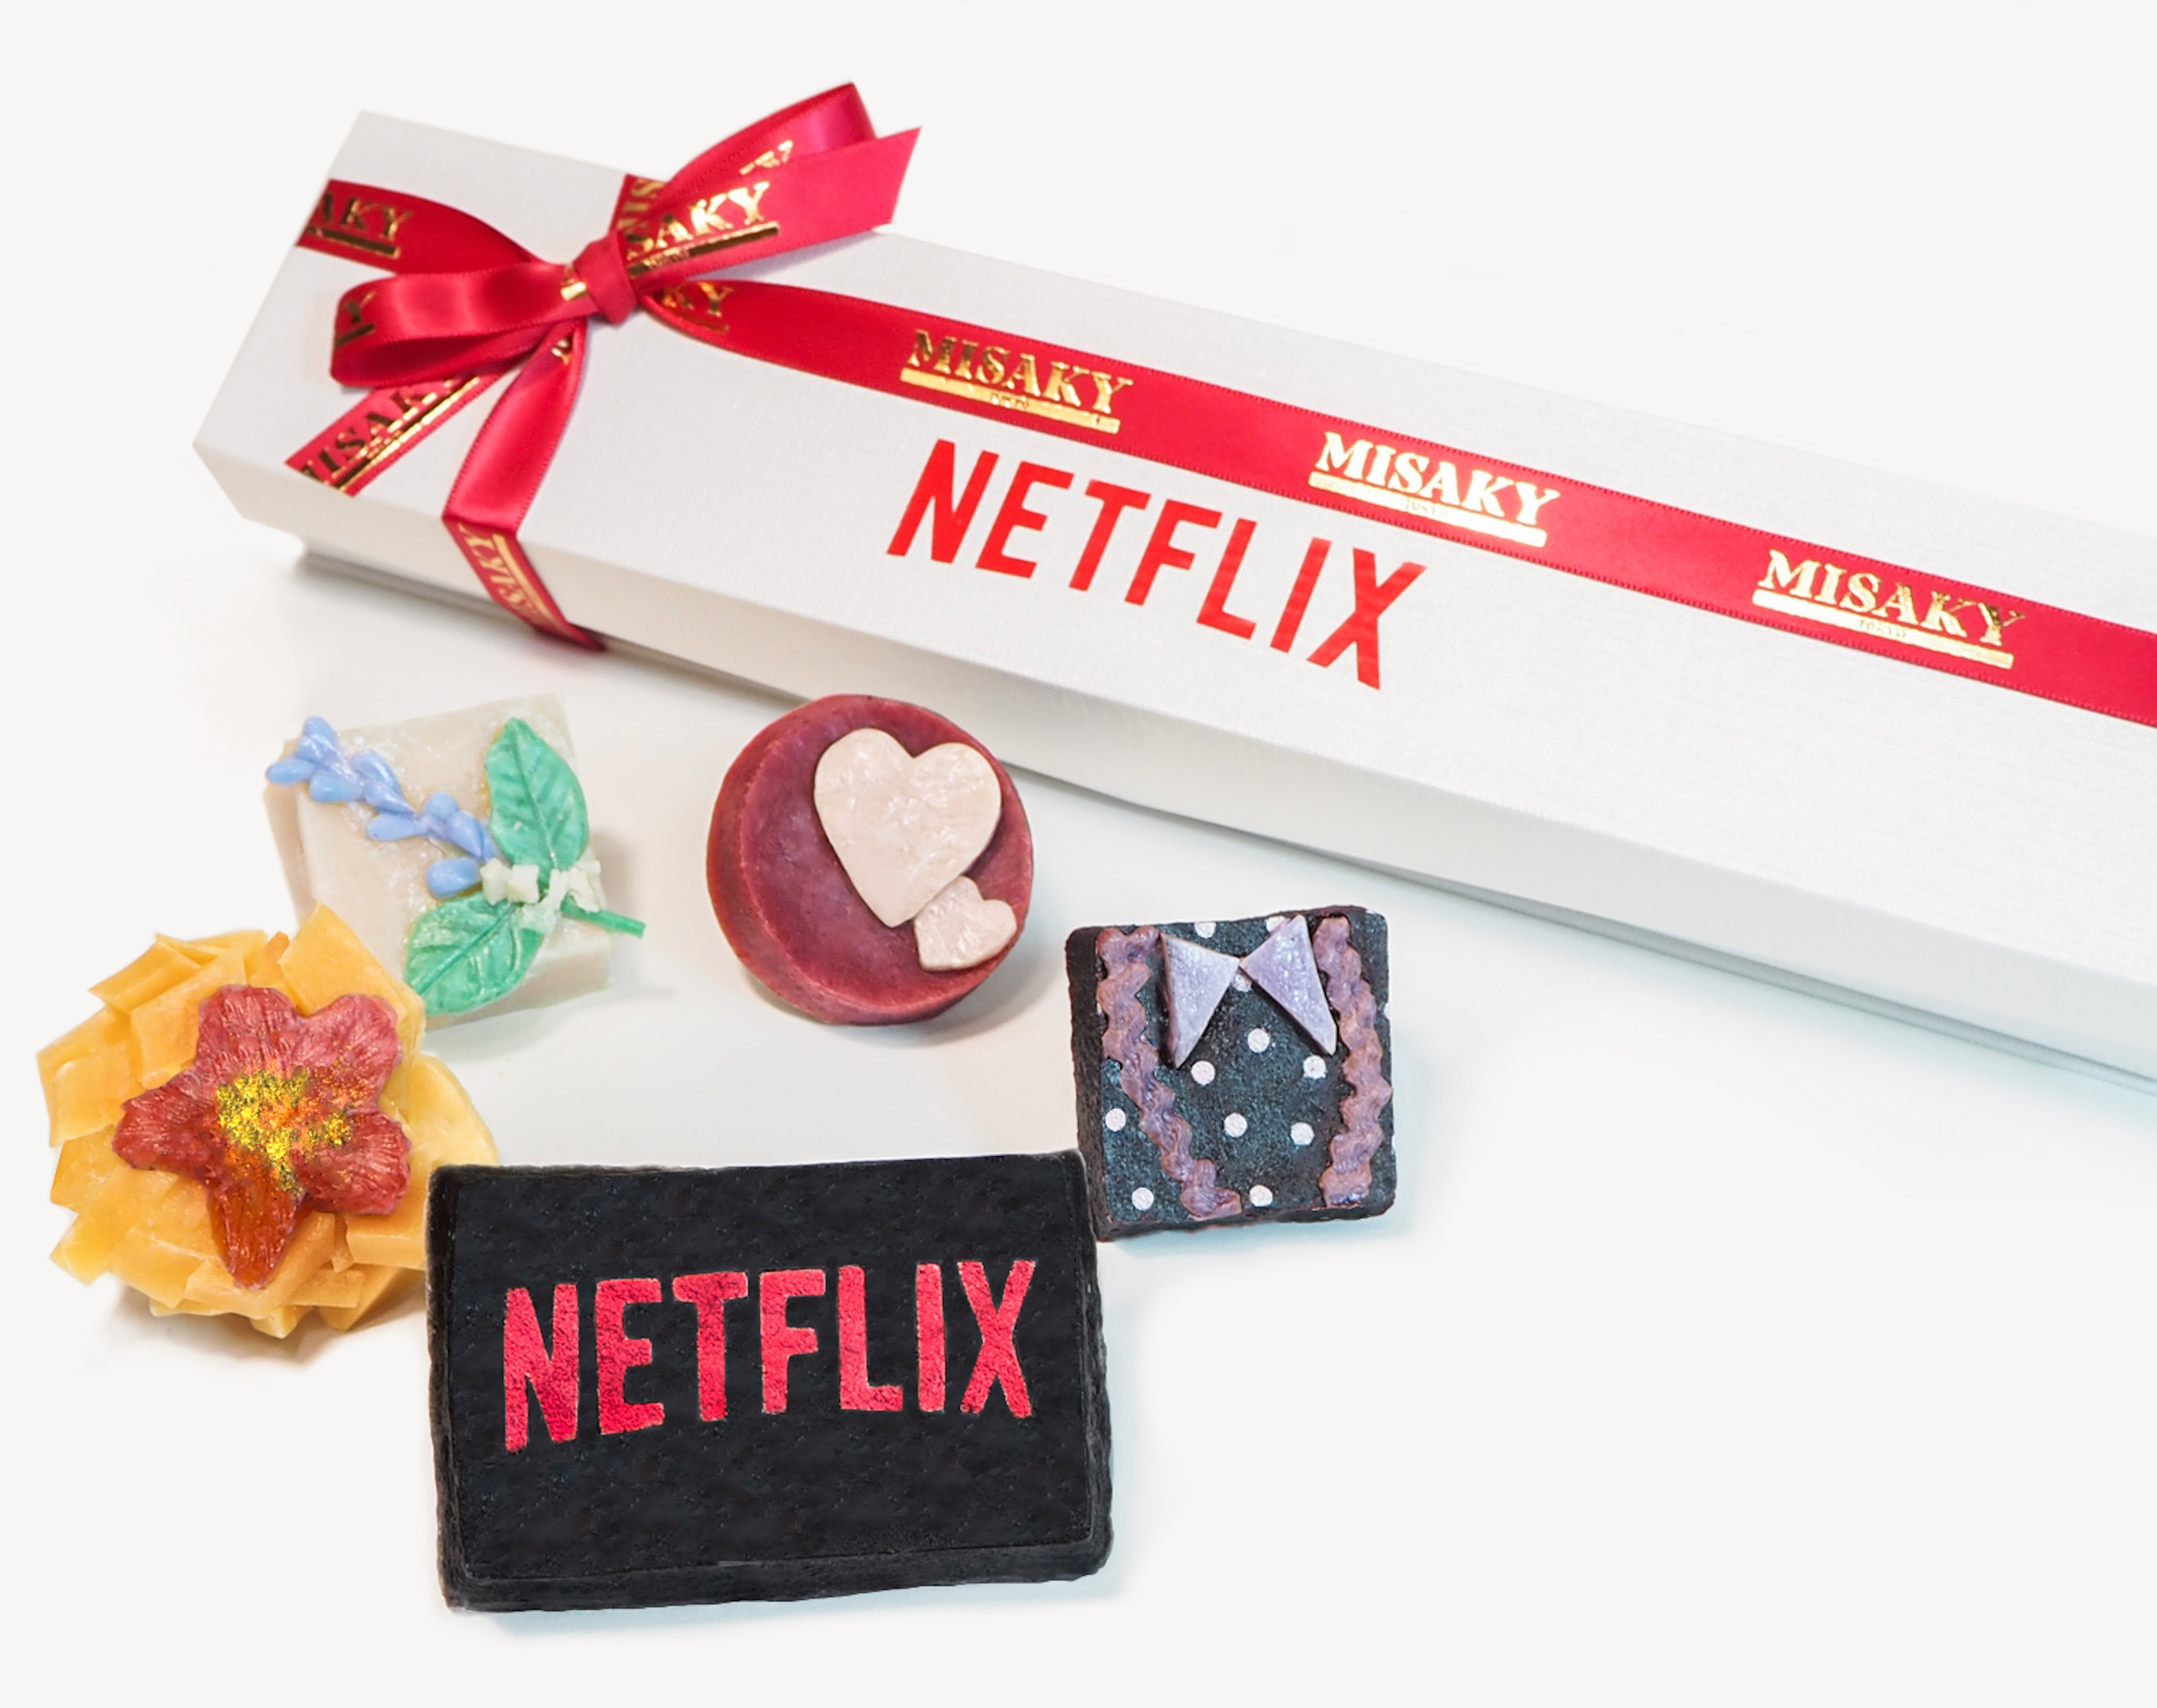 A long white gift box featuring the word 'NETFLIX' in bold black letters, adorned with a red ribbon that has 'MISAKY' printed in gold. Accompanied by decorative items including a red candle with a heart shape, a blue flower, and two fabric patches with 'NETFLIX' logo, set against a white background.